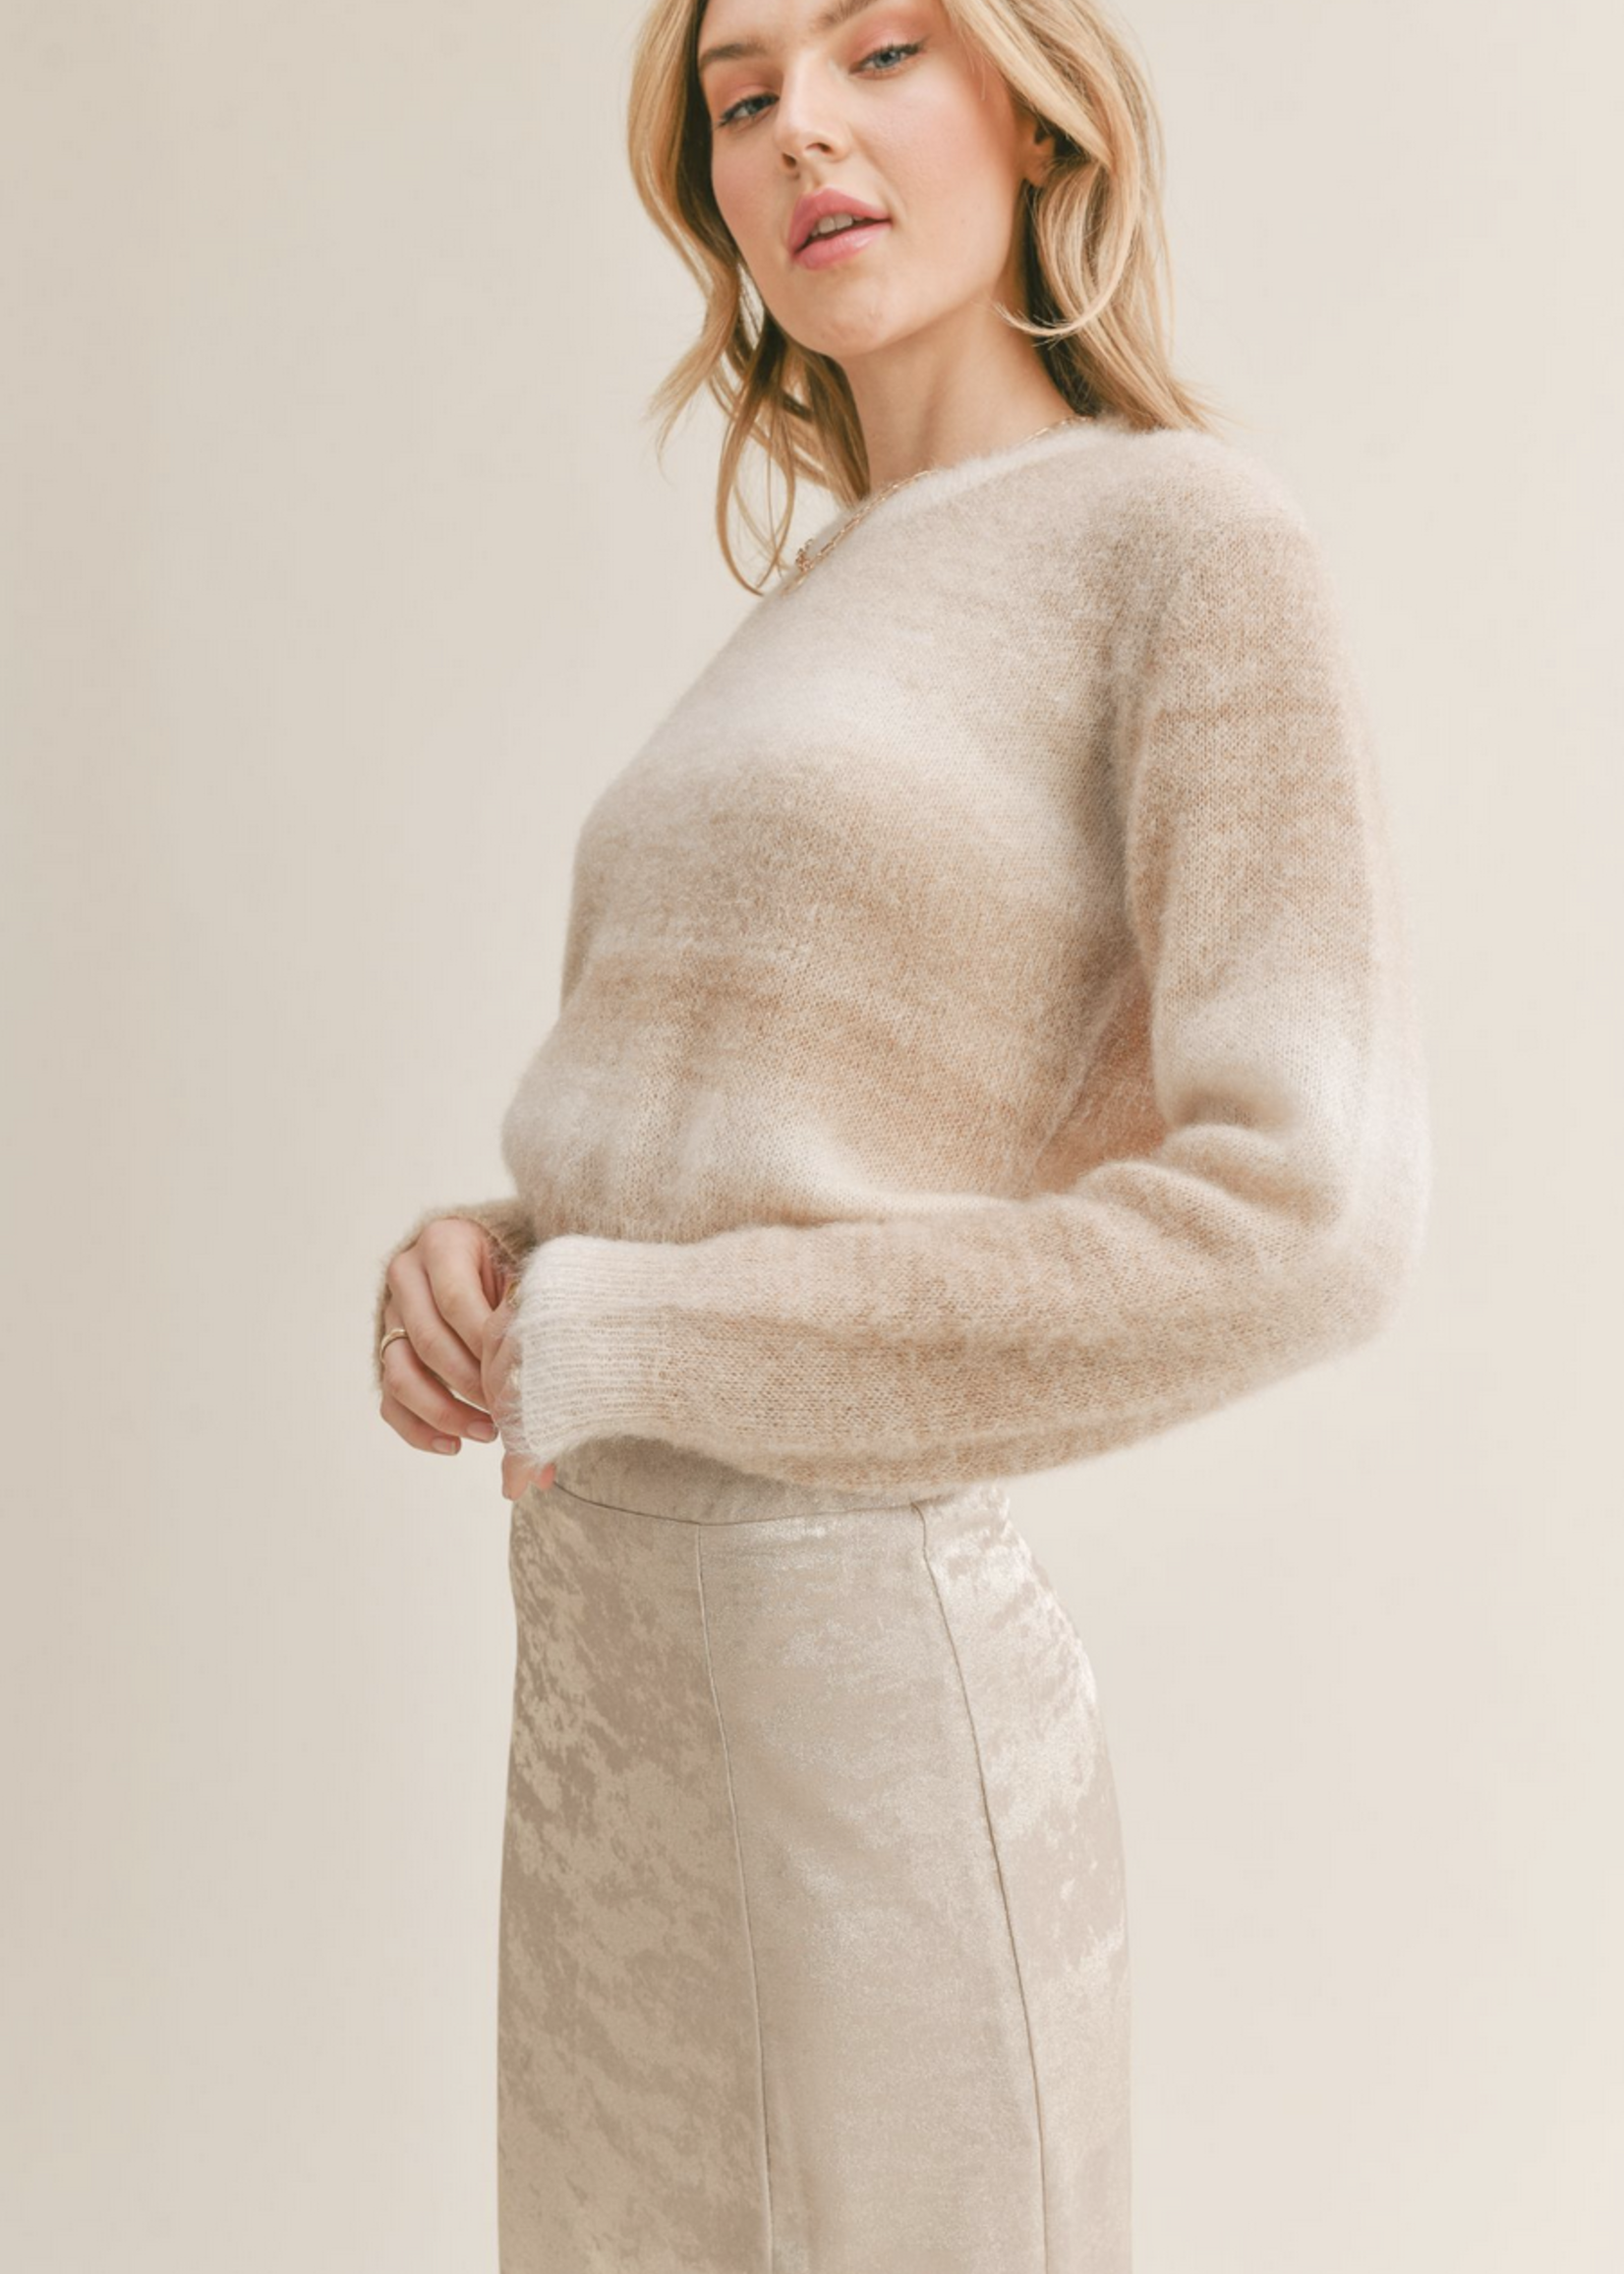 SAGE THE LABEL REACH FOR THE STARS OMBRE SWEATER